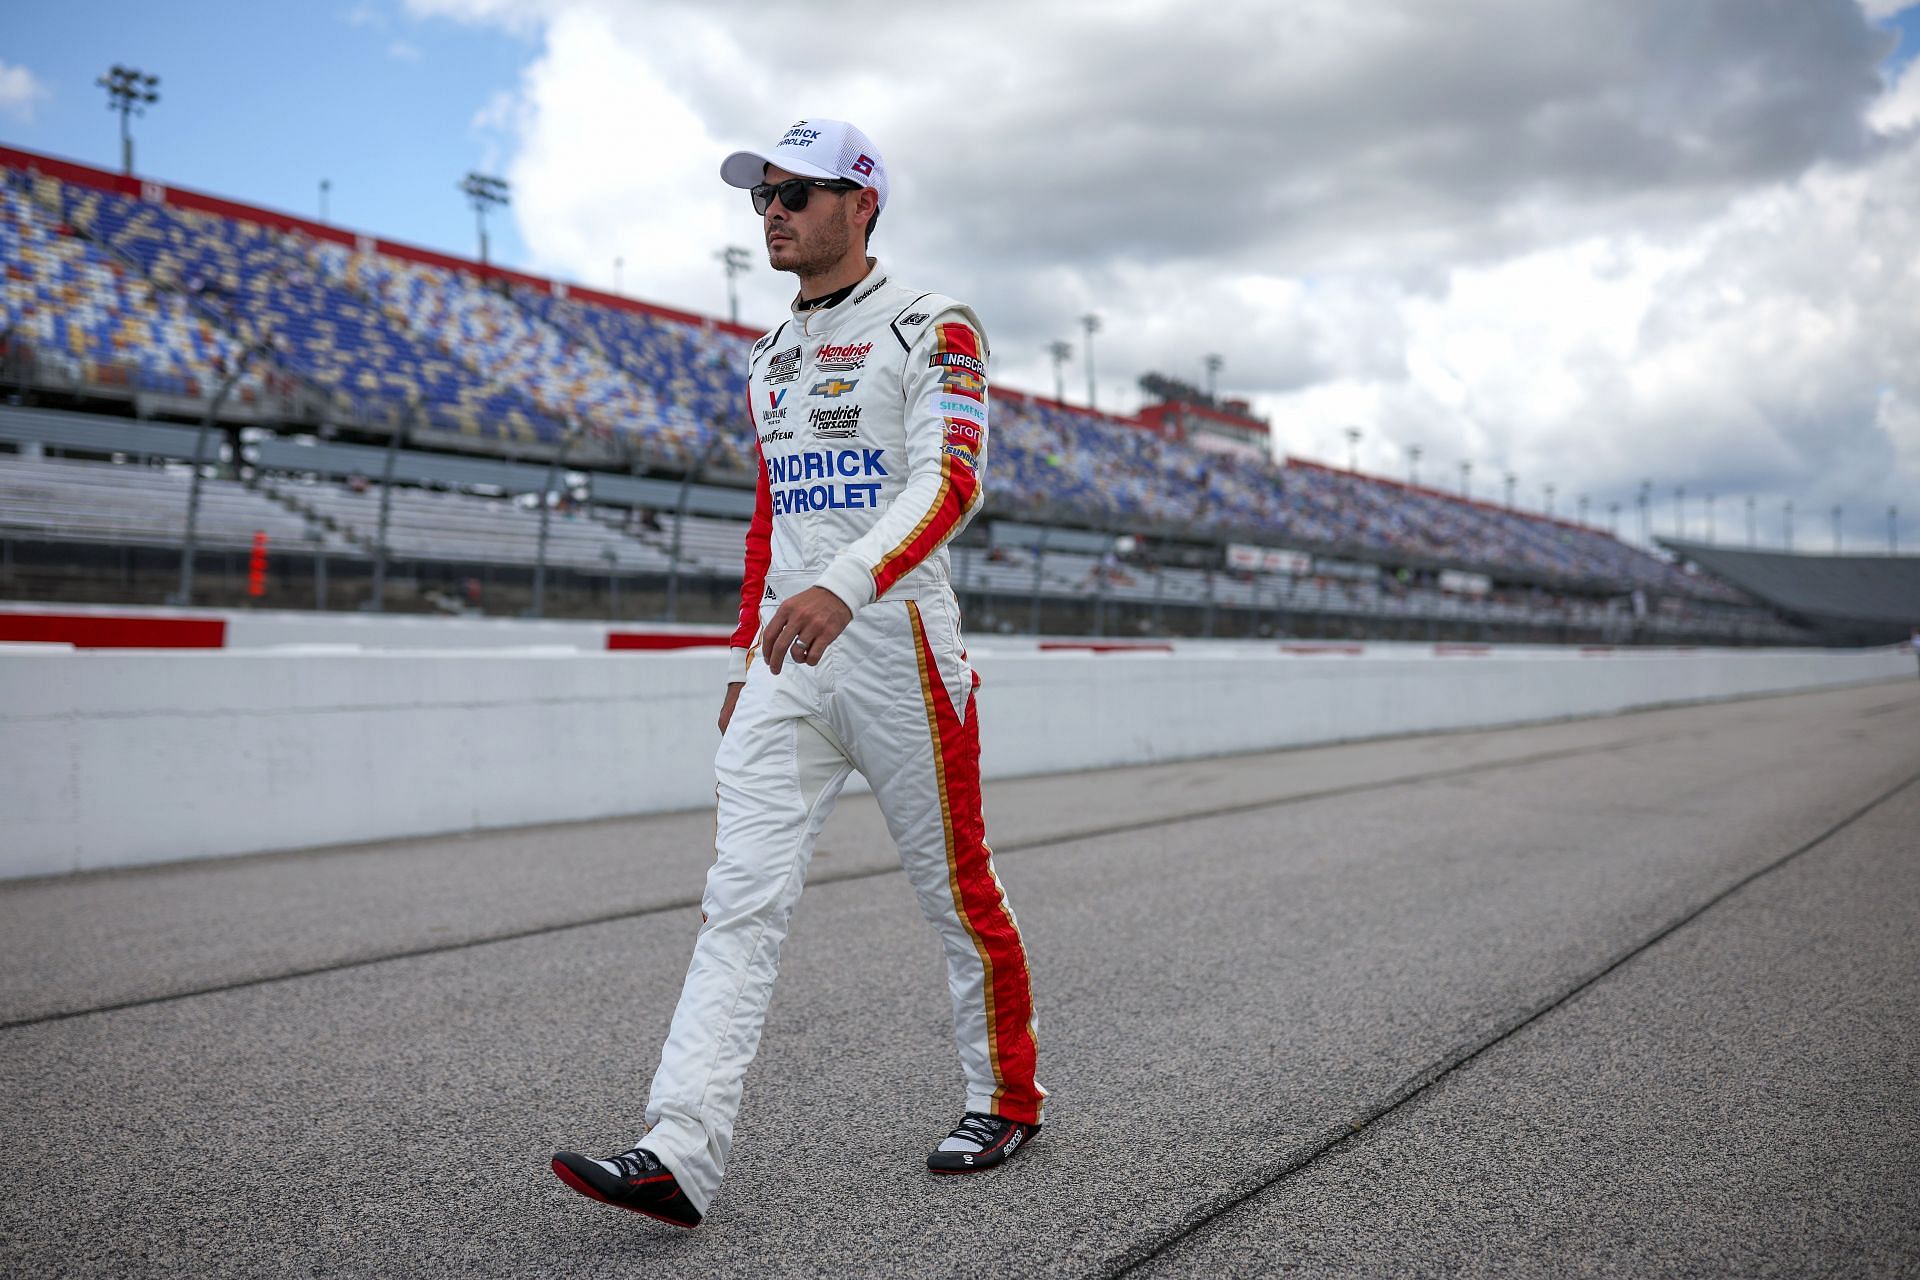 Kyle Larson walks on the grid during qualifying for the 2022 NASCAR Cup Series Goodyear 400 at Darlington Raceway in Darlington, South Carolina. (Photo by James Gilbert/Getty Images)